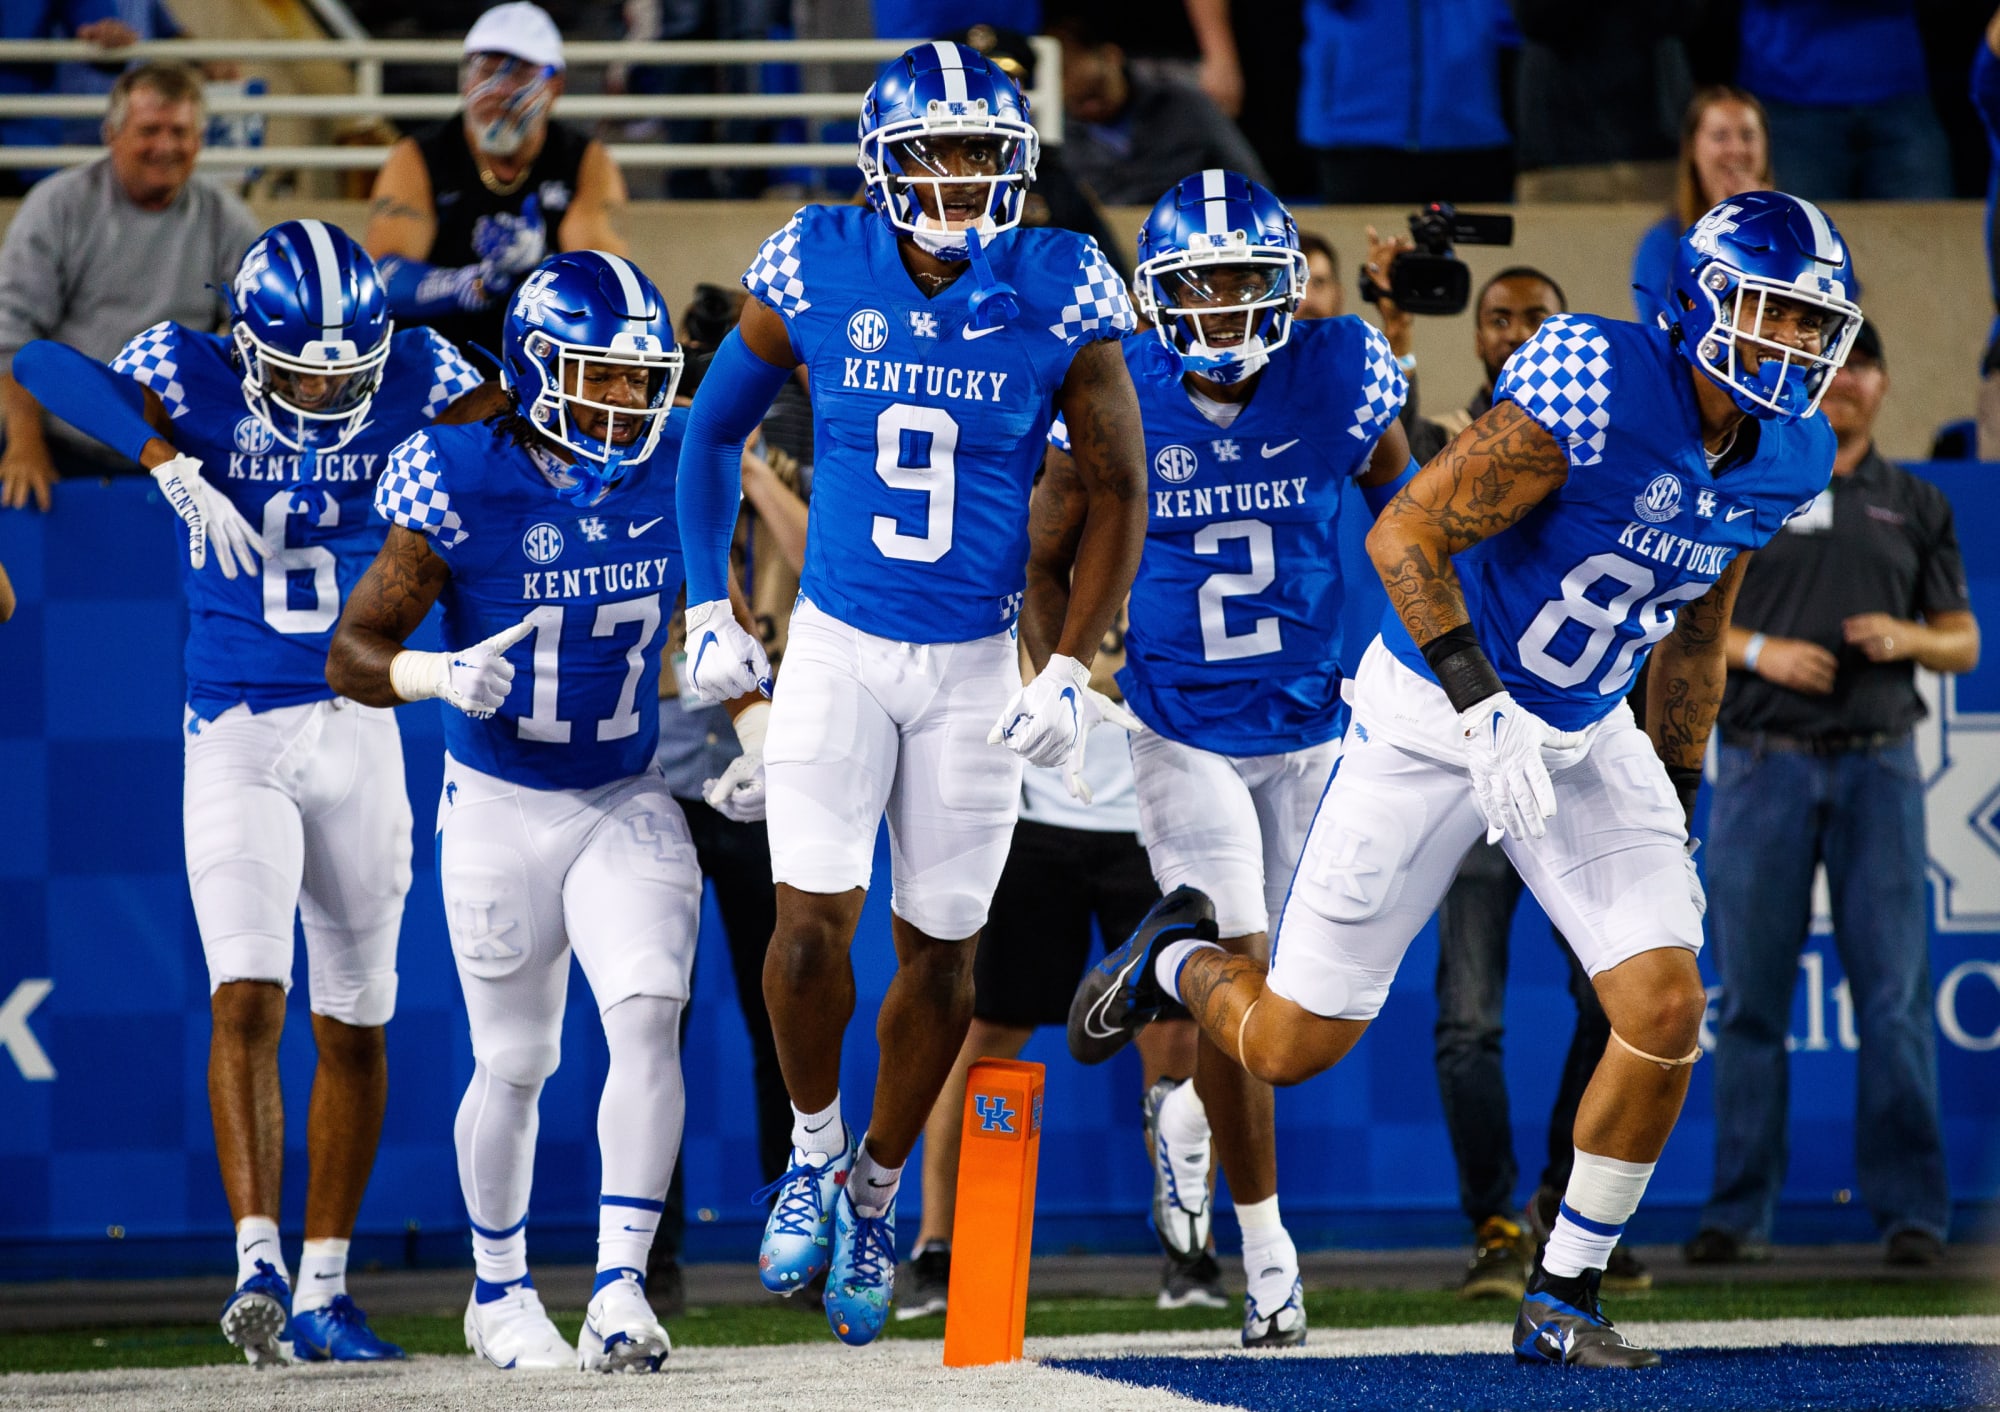 Kentucky football remains unbeaten just take the victory and move on